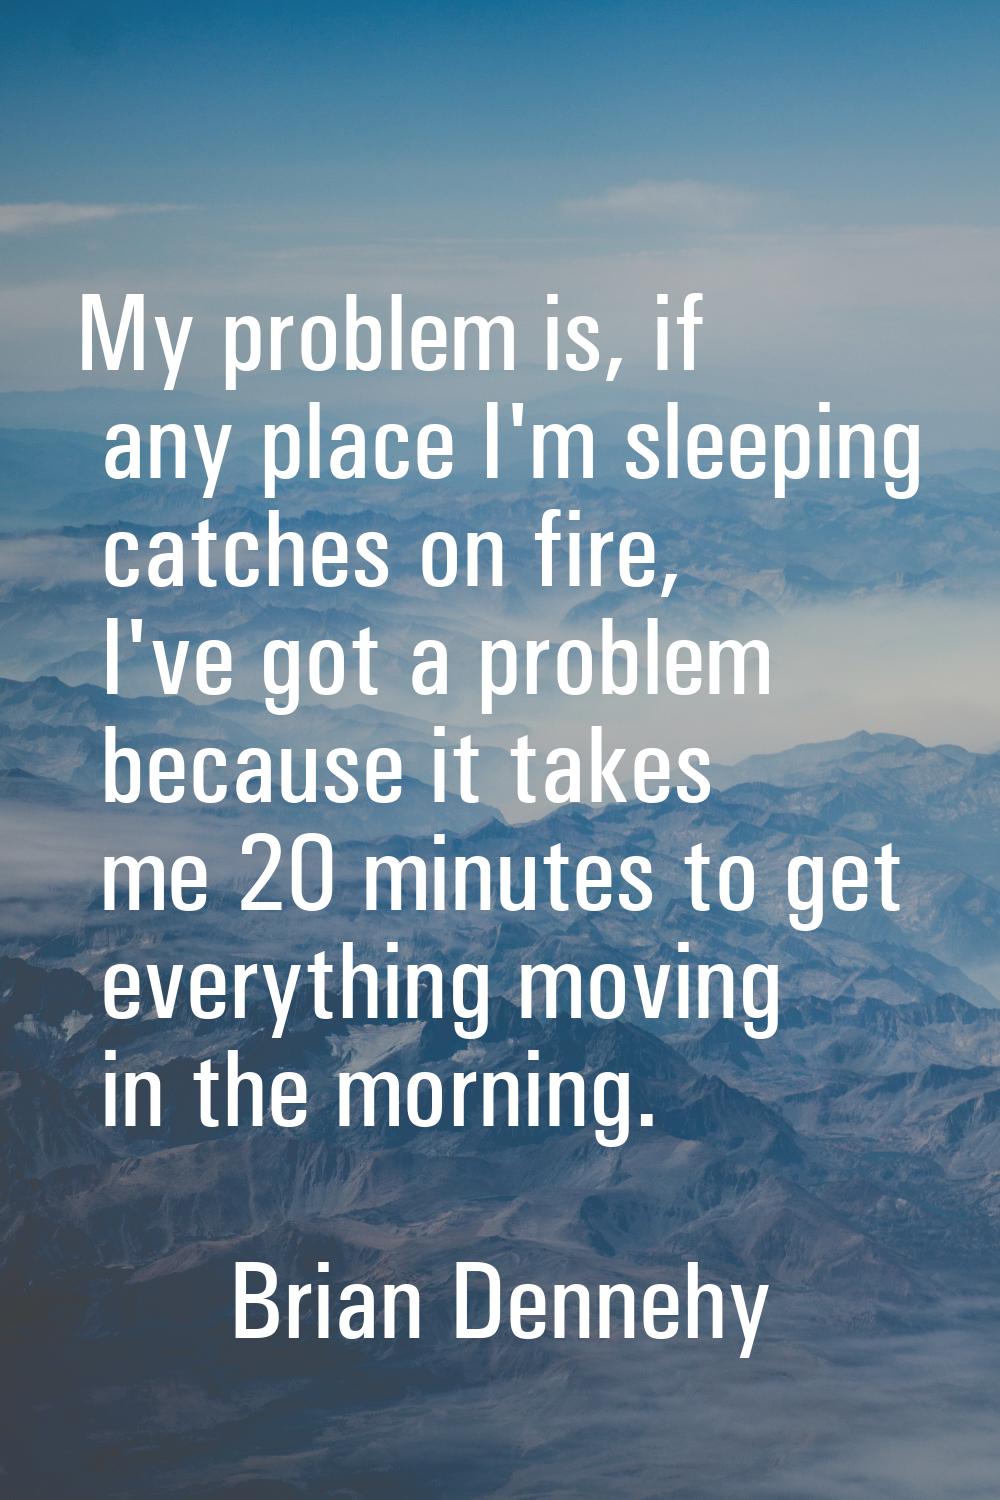 My problem is, if any place I'm sleeping catches on fire, I've got a problem because it takes me 20